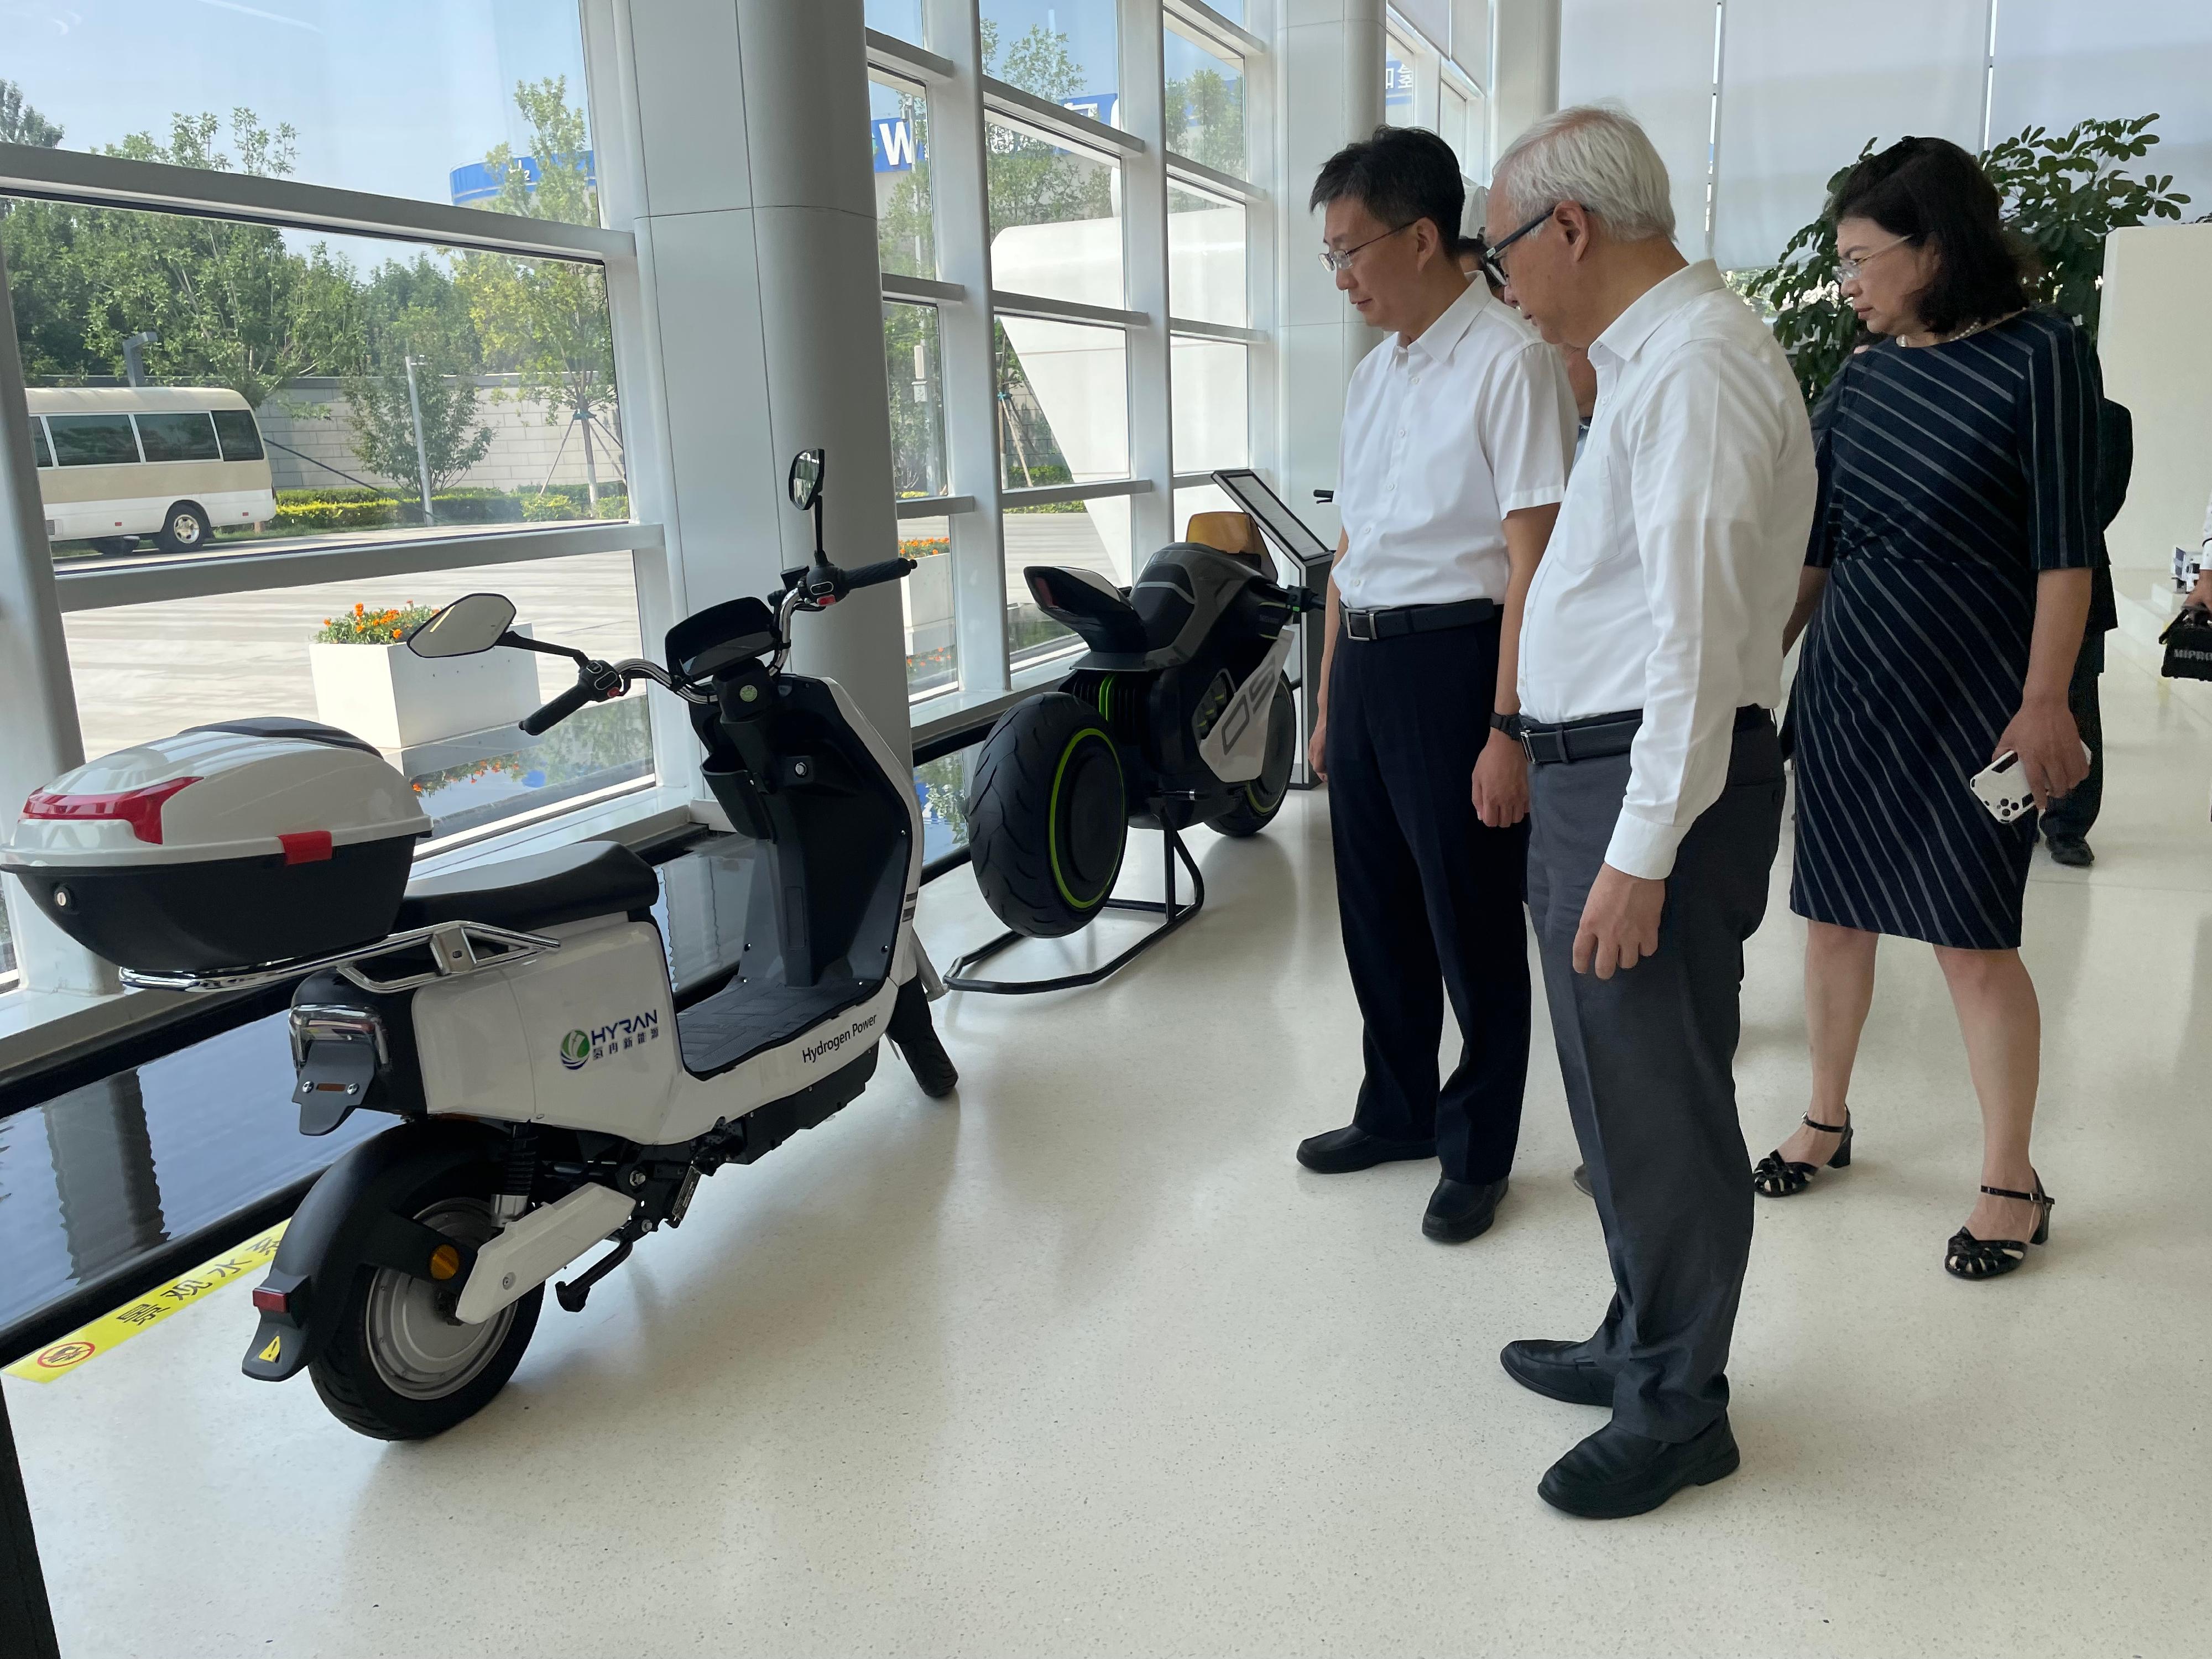 The Secretary for Environment and Ecology, Mr Tse Chin-wan, visited the Daxing International Hydrogen Energy Demonstration Zone today (June 16). Photo shows Mr Tse (centre) viewing different types of hydrogen fuel cell electric vehicles displayed in the Demonstration Zone.